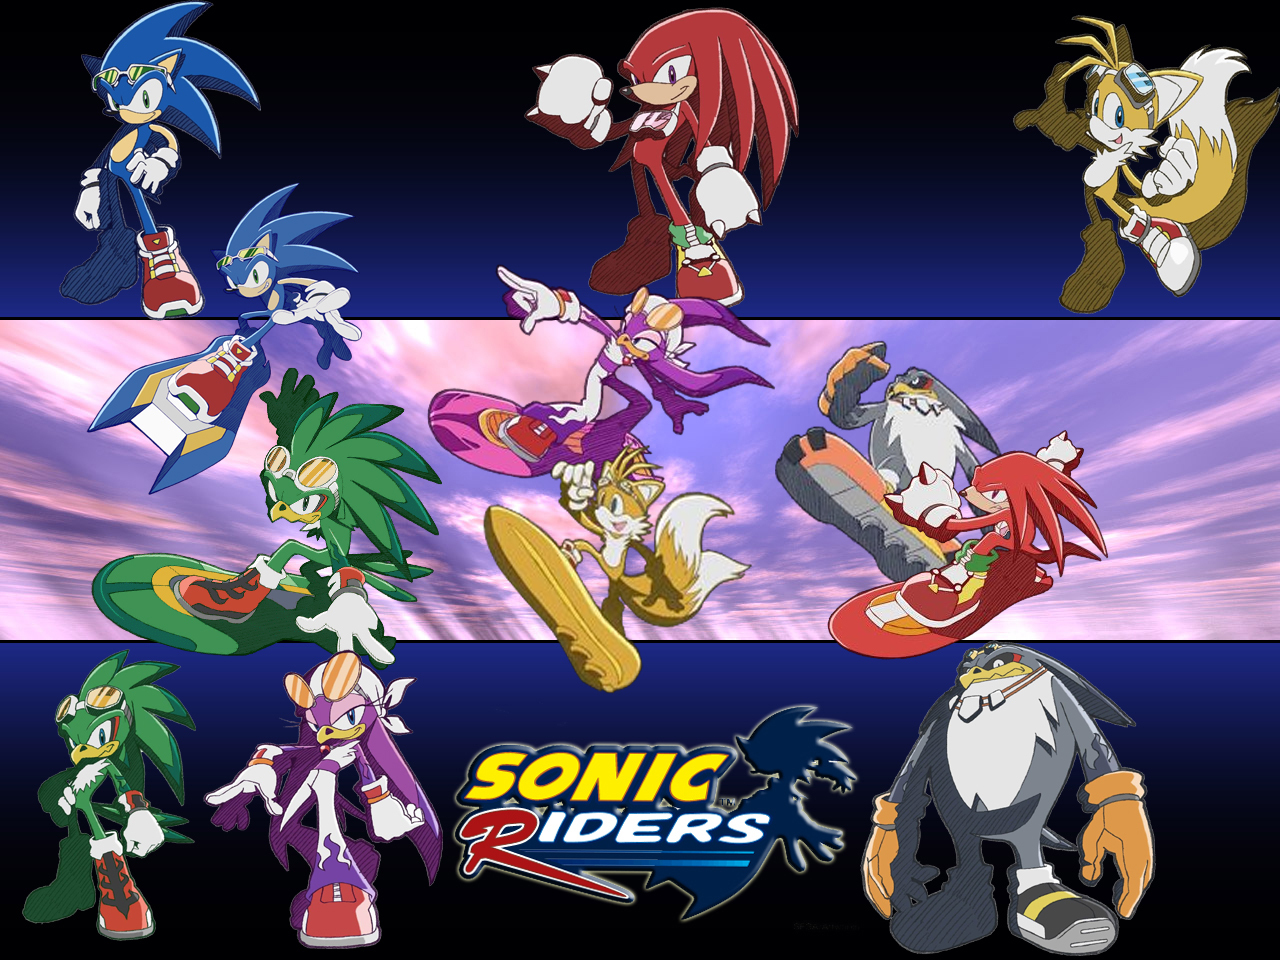 Sonic Rider Image Riders HD Wallpaper And Background Photos